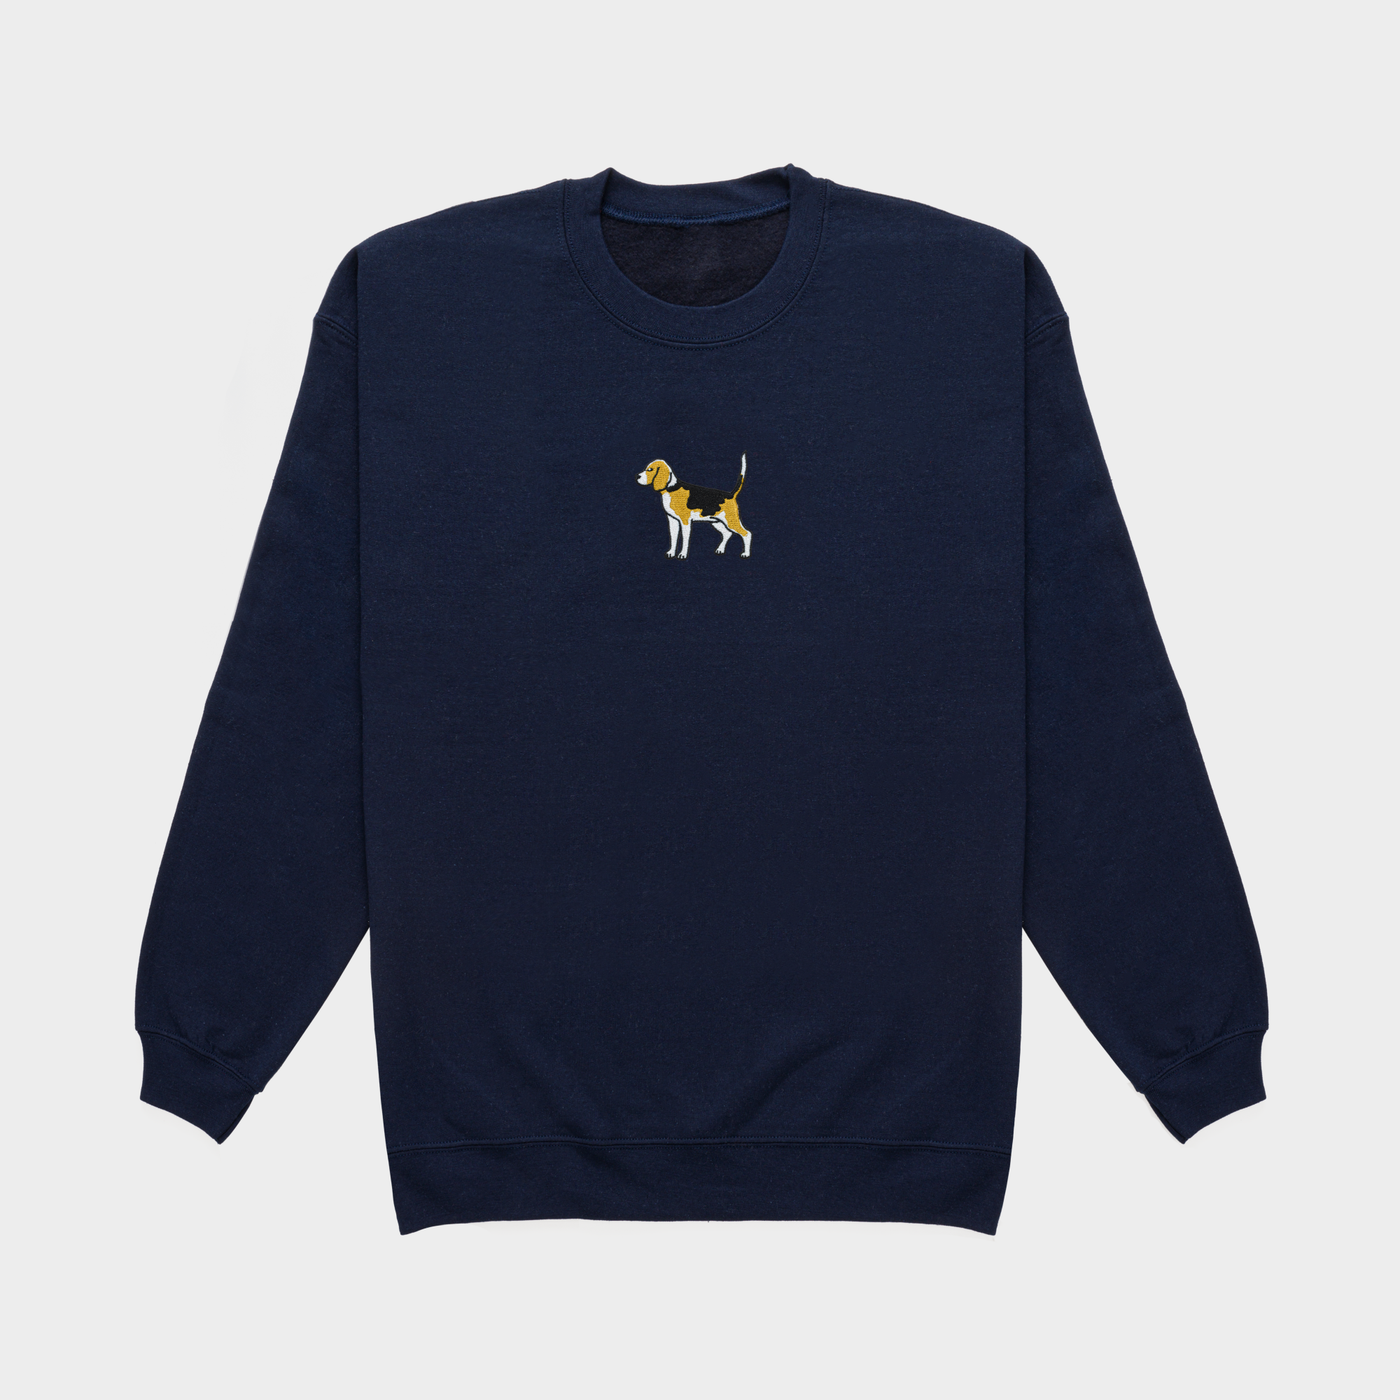 Bobby's Planet Men's Embroidered Beagle Sweatshirt from Paws Dog Cat Animals Collection in Navy Color#color_navy